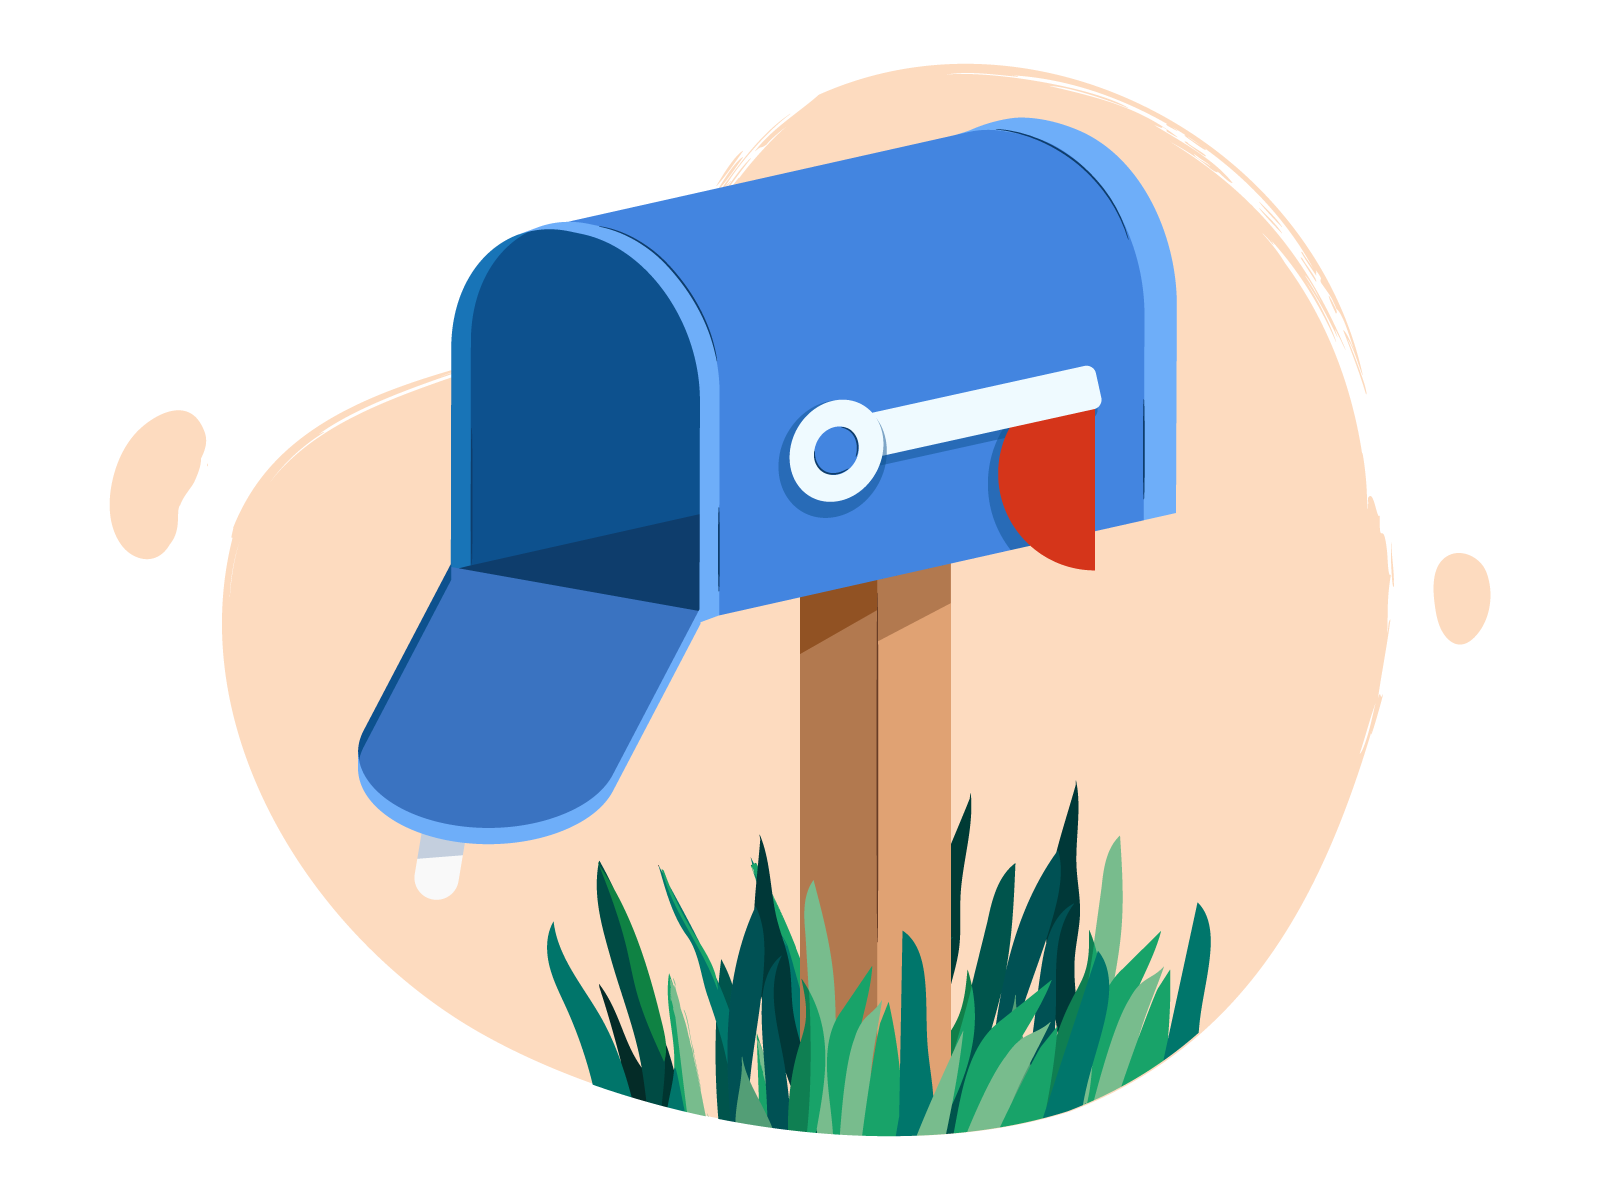 Mailbox by Maria Gregoriou on Dribbble